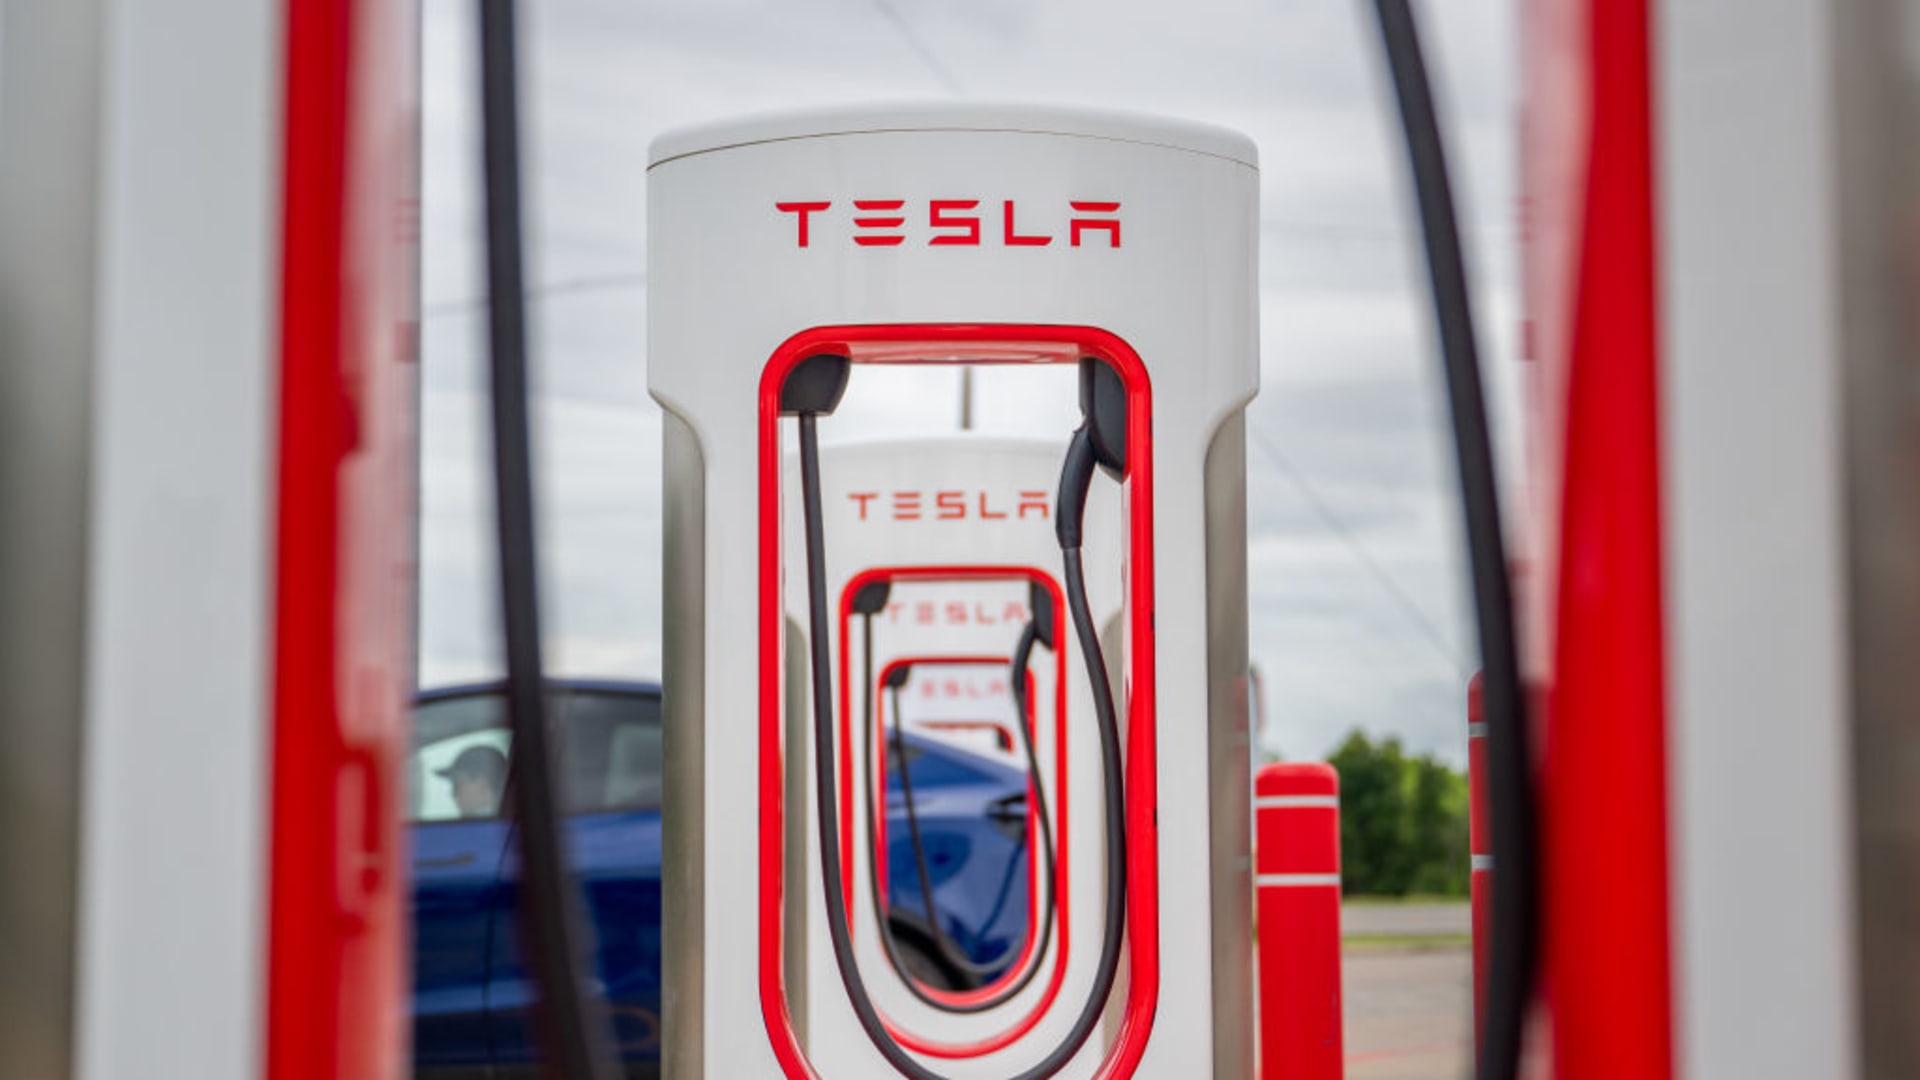 tesla-shares-drop-nearly-6%-after-musk-cuts-about-500-jobs-in-supercharger-team